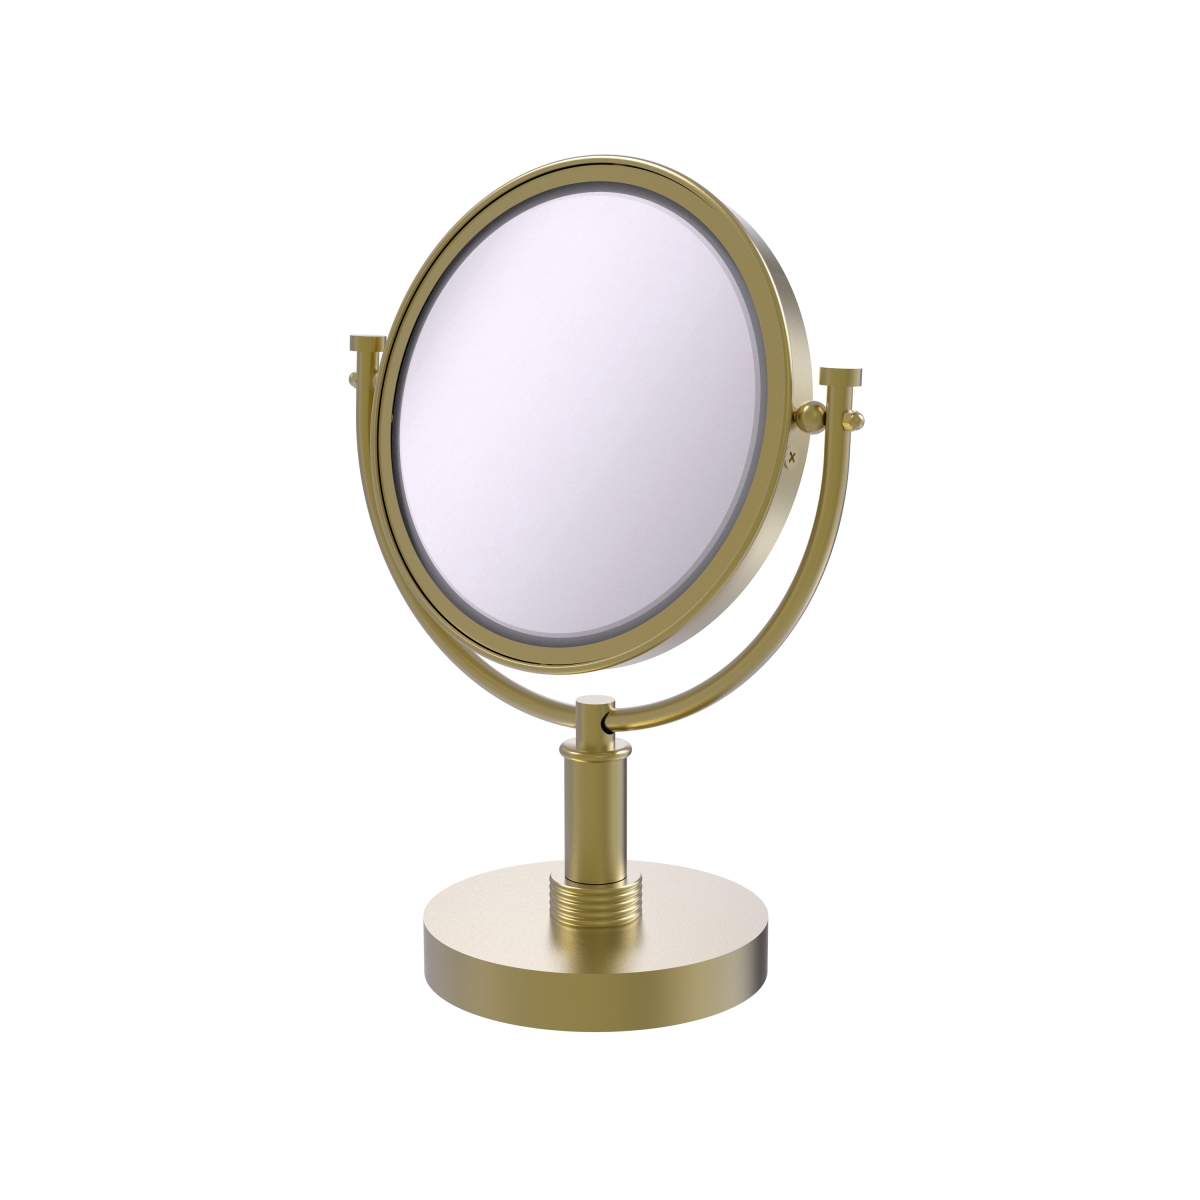 Dm-4g-3x-sbr Grooved Ring Style 8 In. Vanity Top Make-up Mirror 3x Magnification, Satin Brass